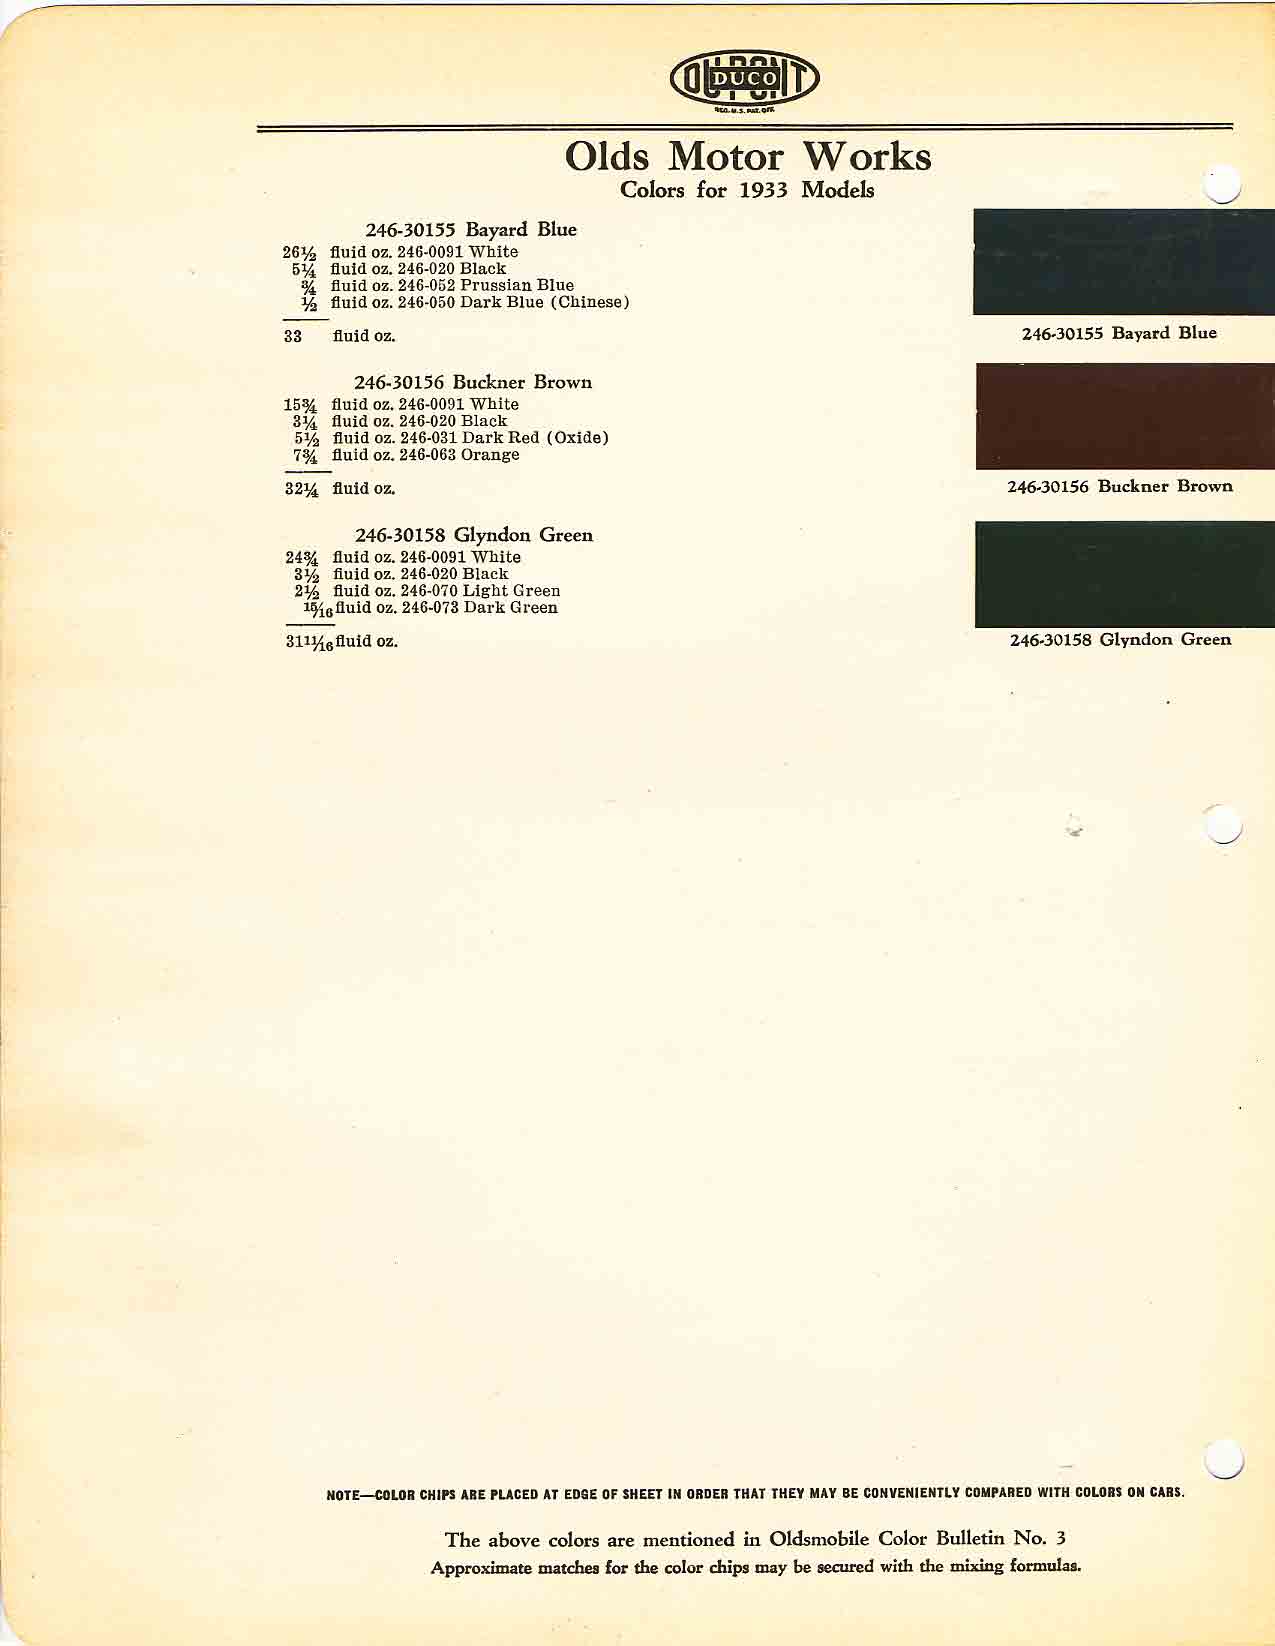 Colors and codes used on Oldsmobile Vehicles in 1933